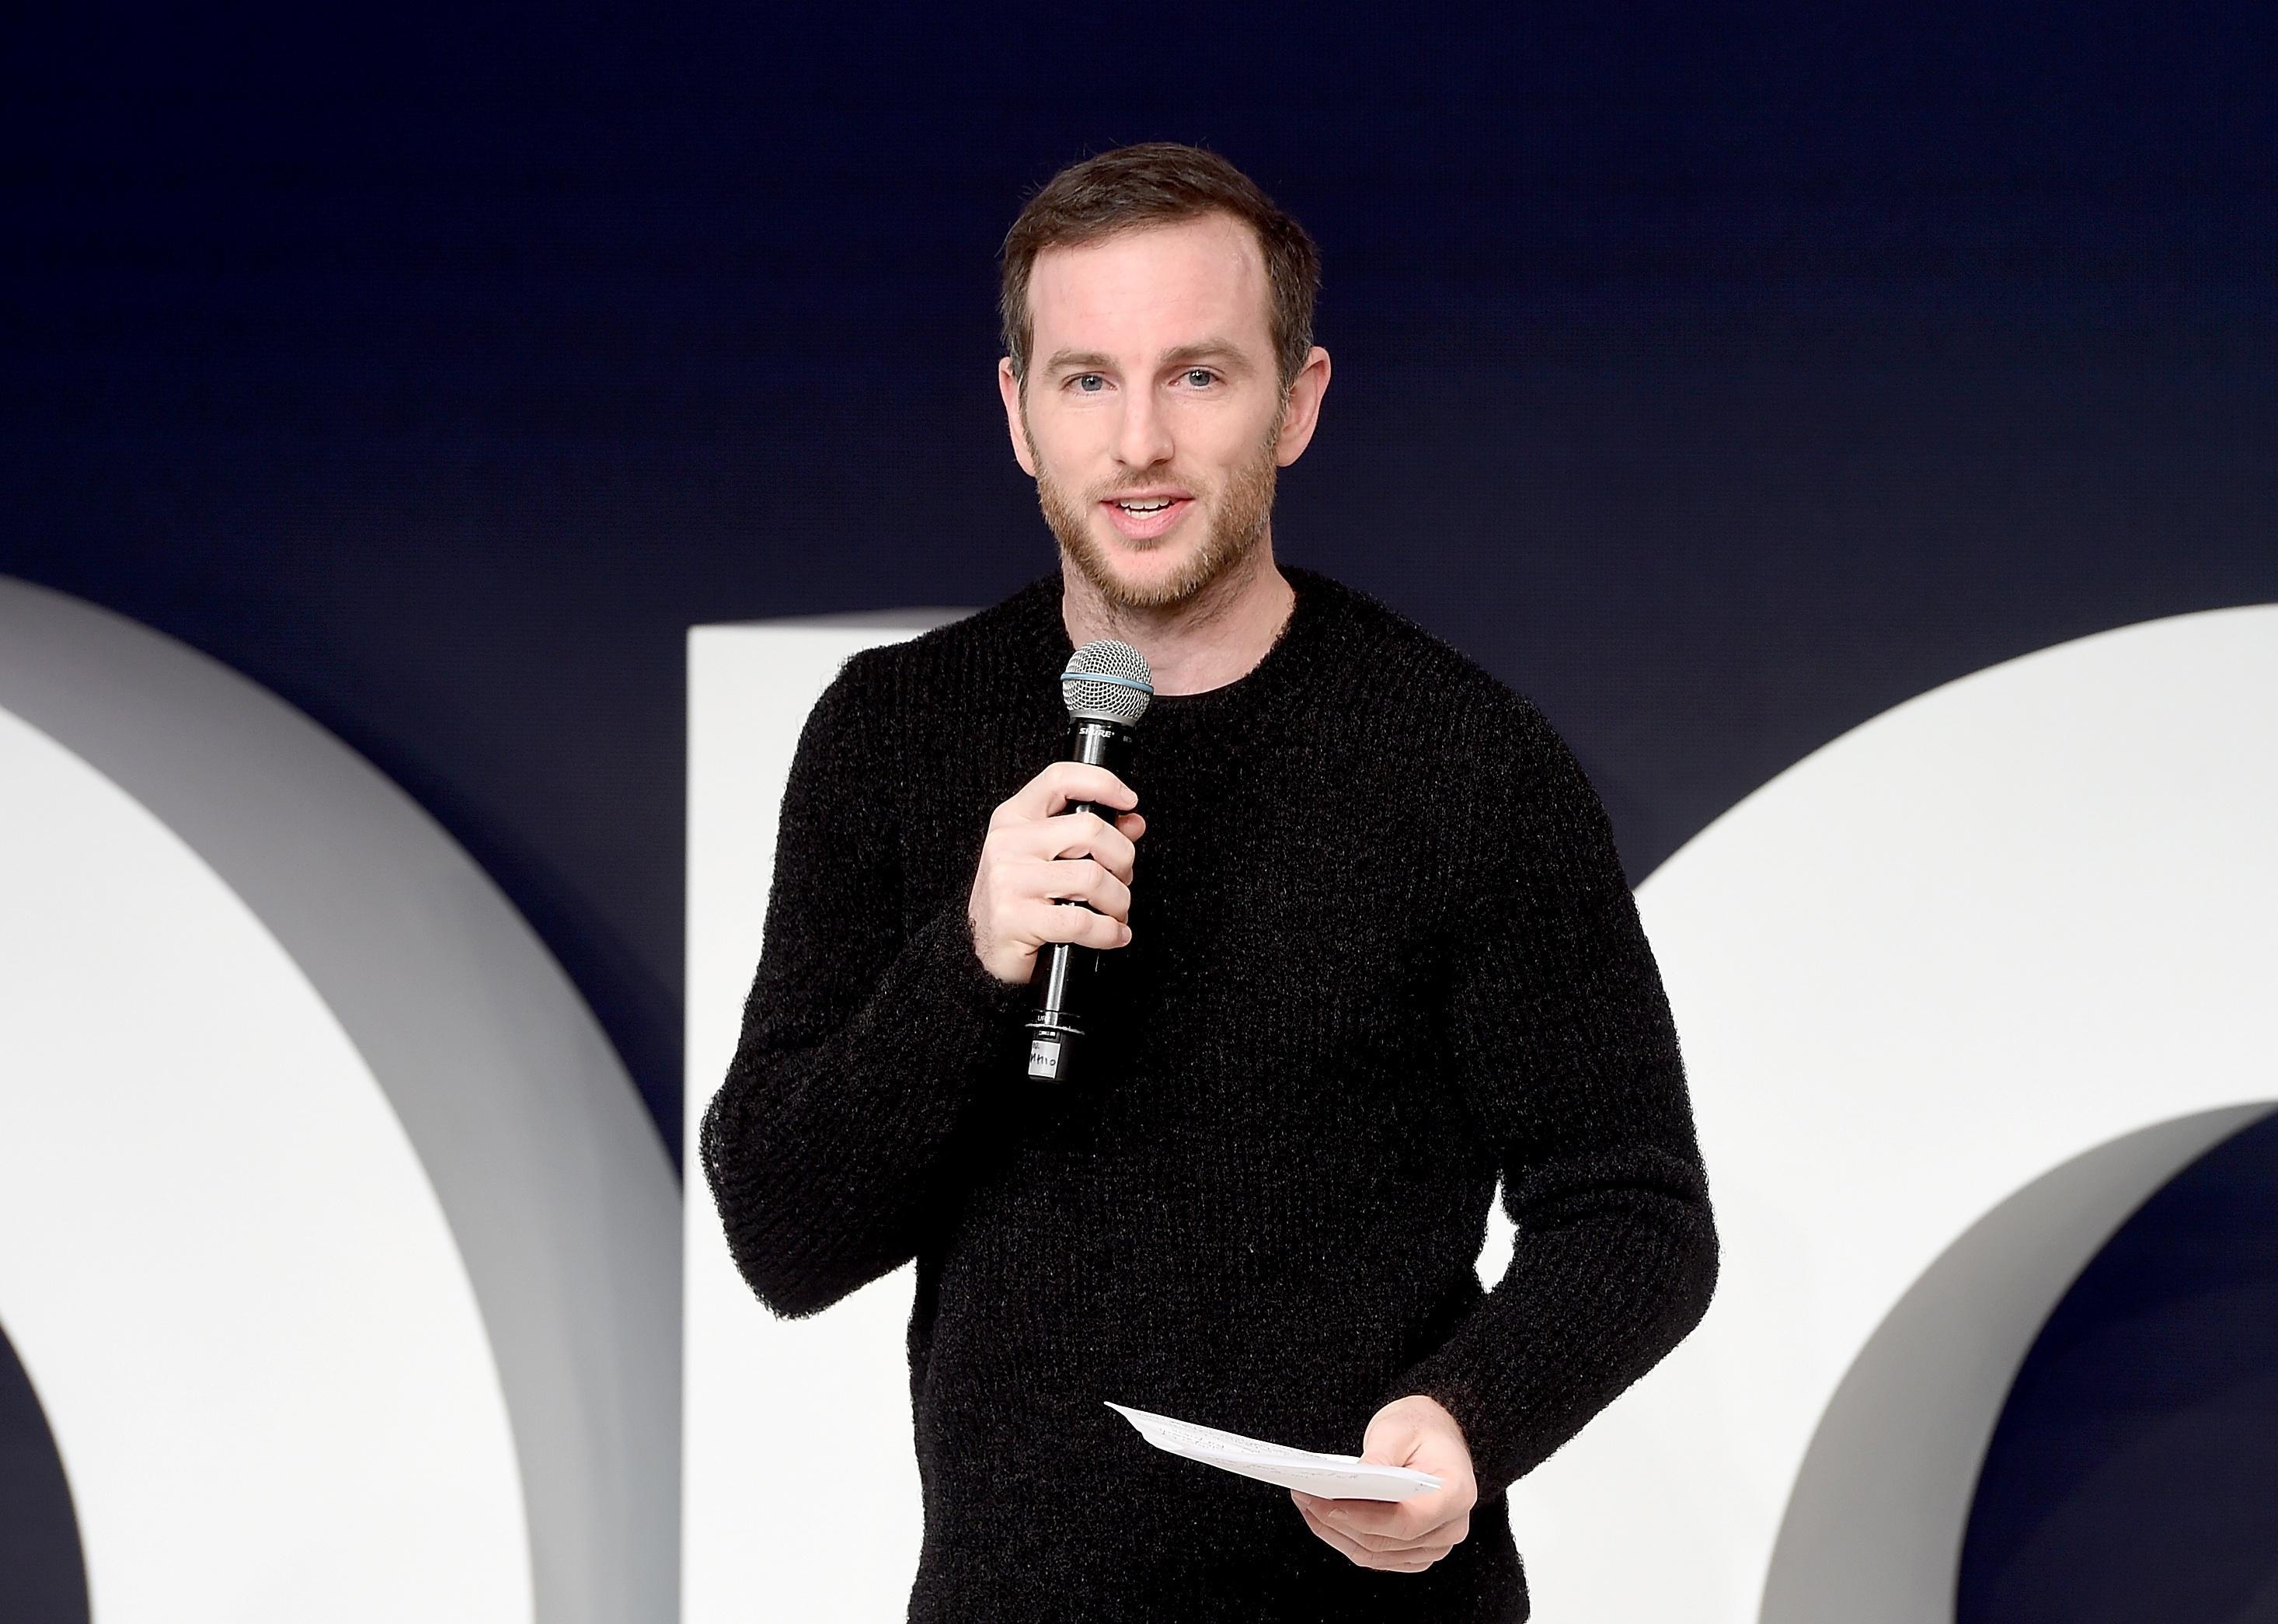 Joe Gebbia in a black sweater with a microphone on stage.